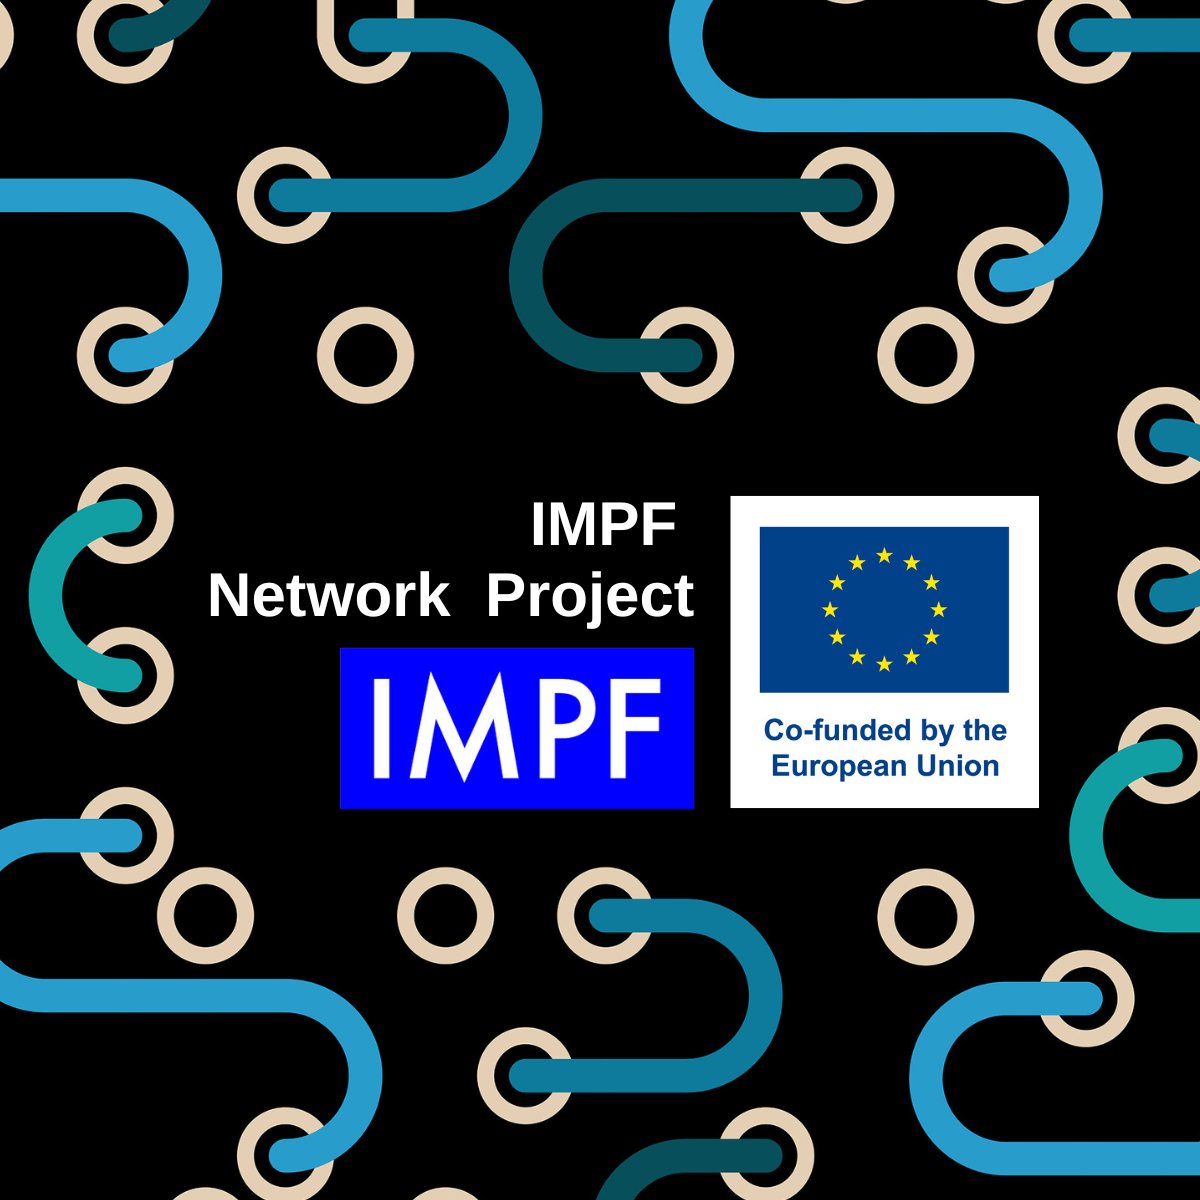 With the support of @europe_creative  funding @IMPForum  IMPF Network Project aims to empower #indie #publishers to innovate for a greener, fairer, gender-equal and transparent music ecosystem. #CreativeEurope zurl.co/MBT6